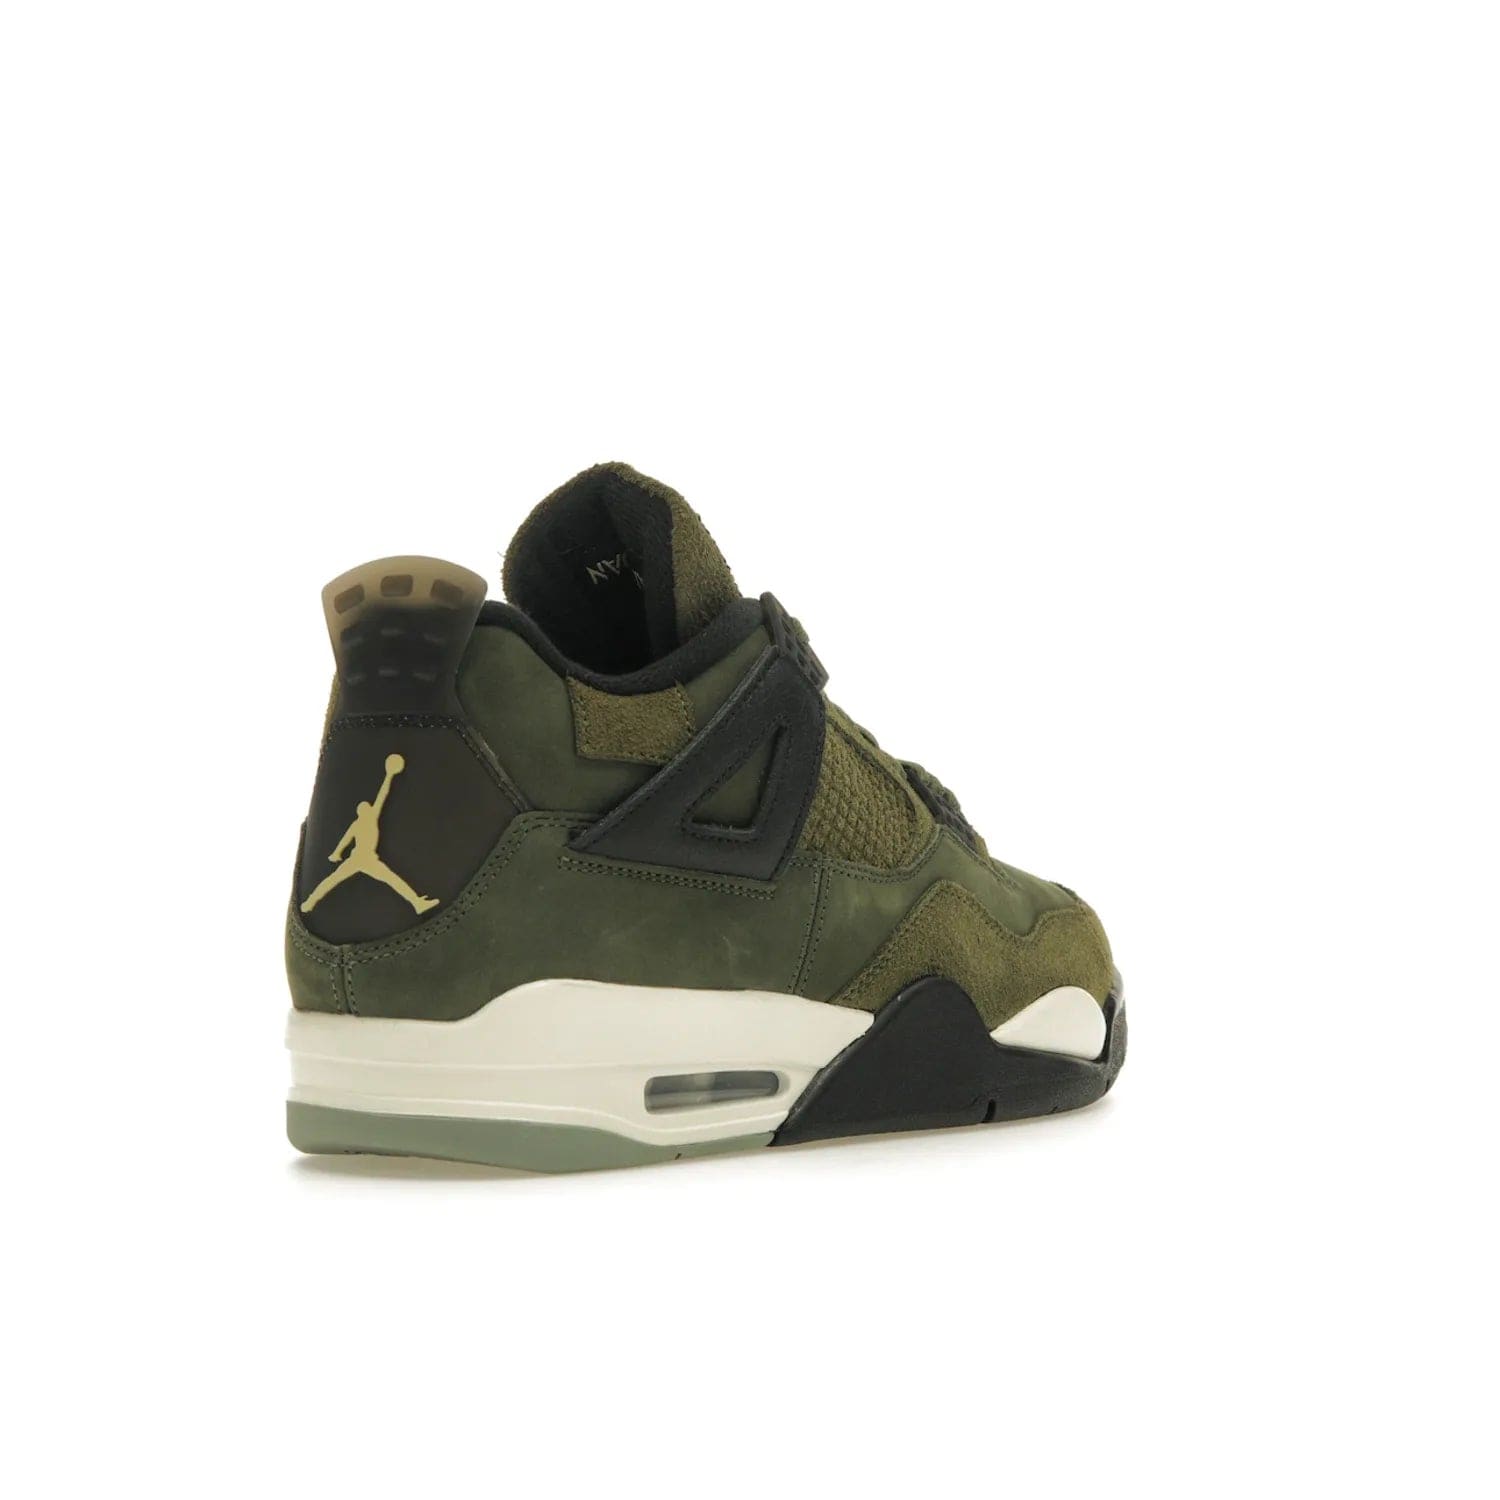 Jordan 4 Retro SE Craft Medium Olive - Image 32 - Only at www.BallersClubKickz.com - Grab the Jordan 4 Retro SE Crafts for a unique style. Combines Medium Olive, Pale Vanilla, Khaki, Black and Sail, with same classic shape, cushioning, and rubber outsole. Available on November 18th!